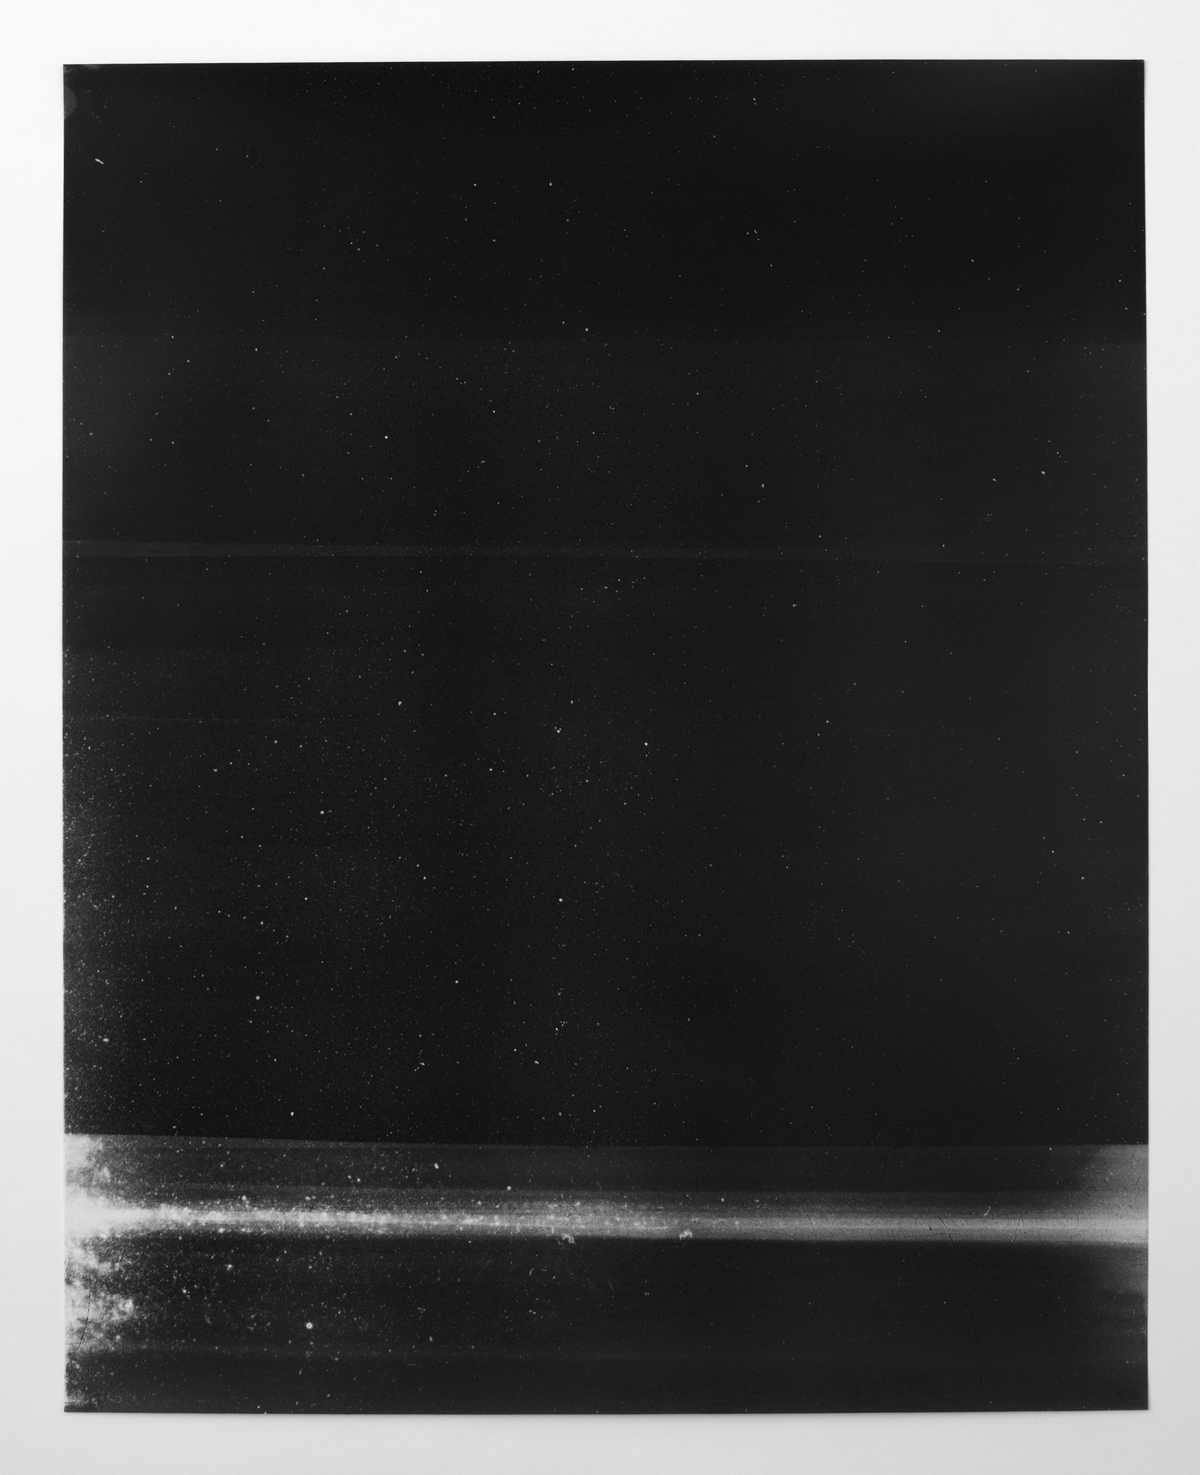   Untitled (black, from the series reflected/repeated - light becomes form, the horizon rests into view)  2015.&nbsp; Oil based ink painted on frosted mylar.&nbsp; 20 x 25 inches unframed.&nbsp; 